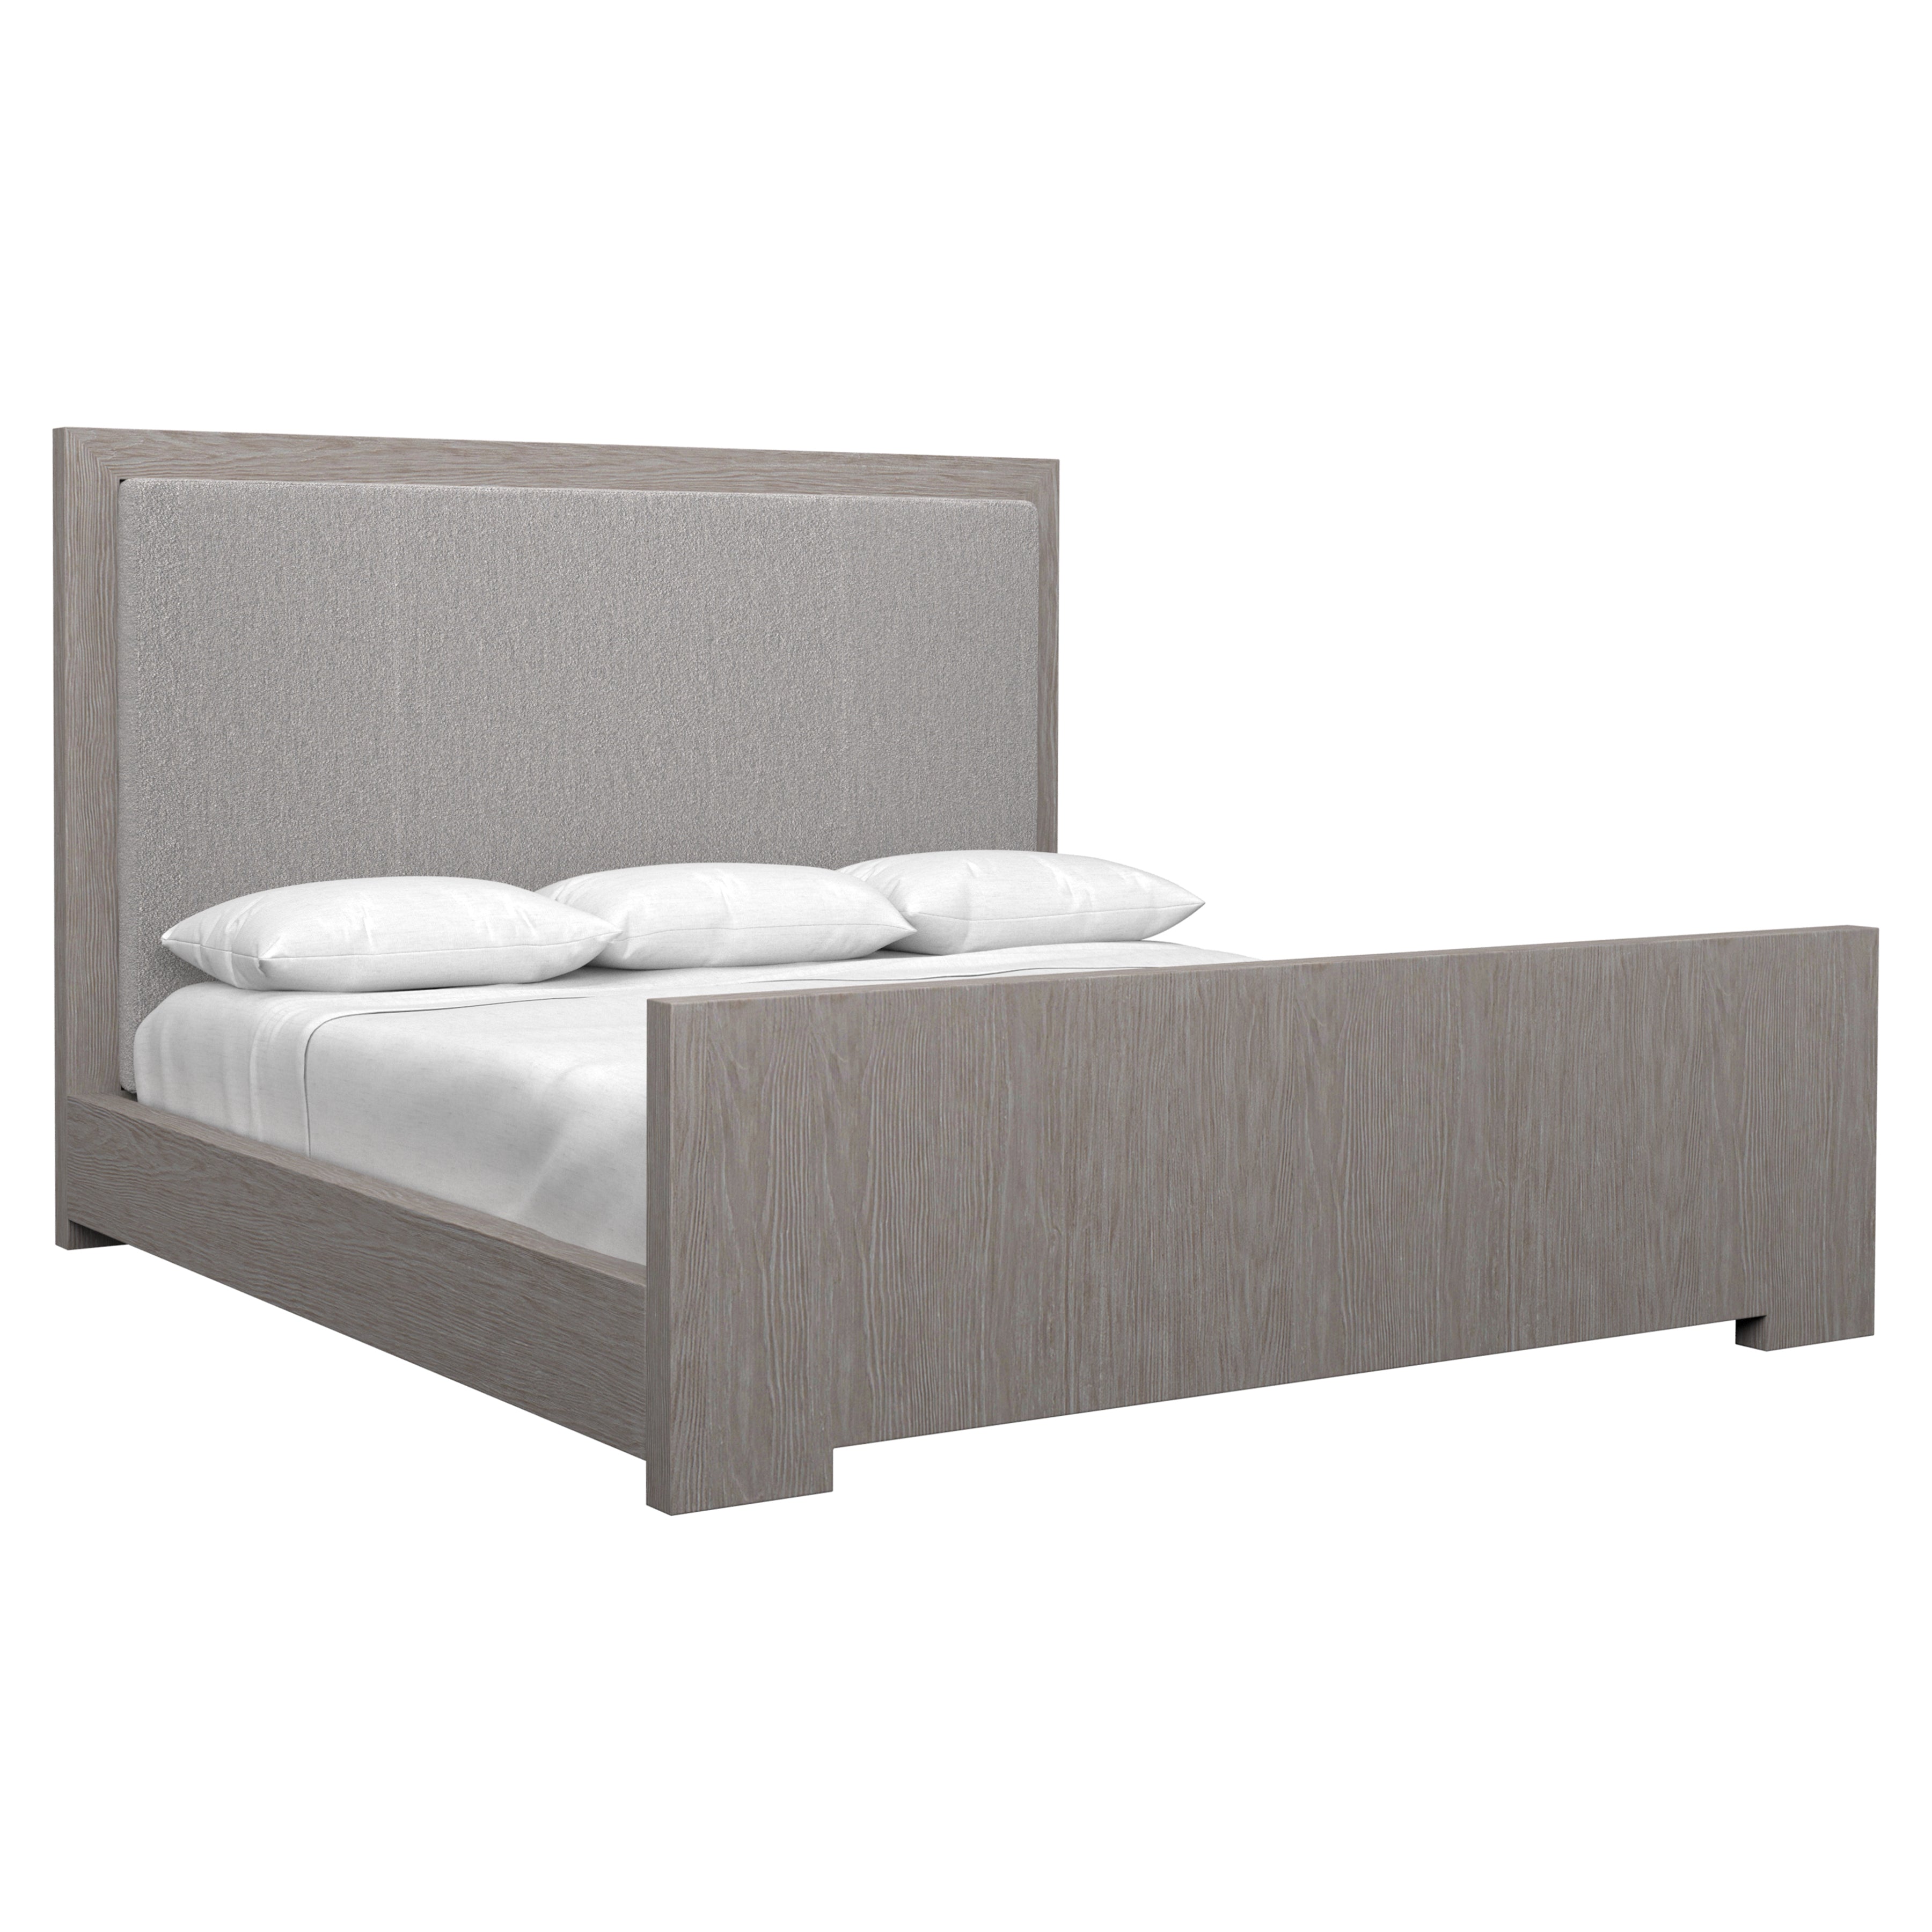 Trianon California King Panel Bed in Gris Wood Finish